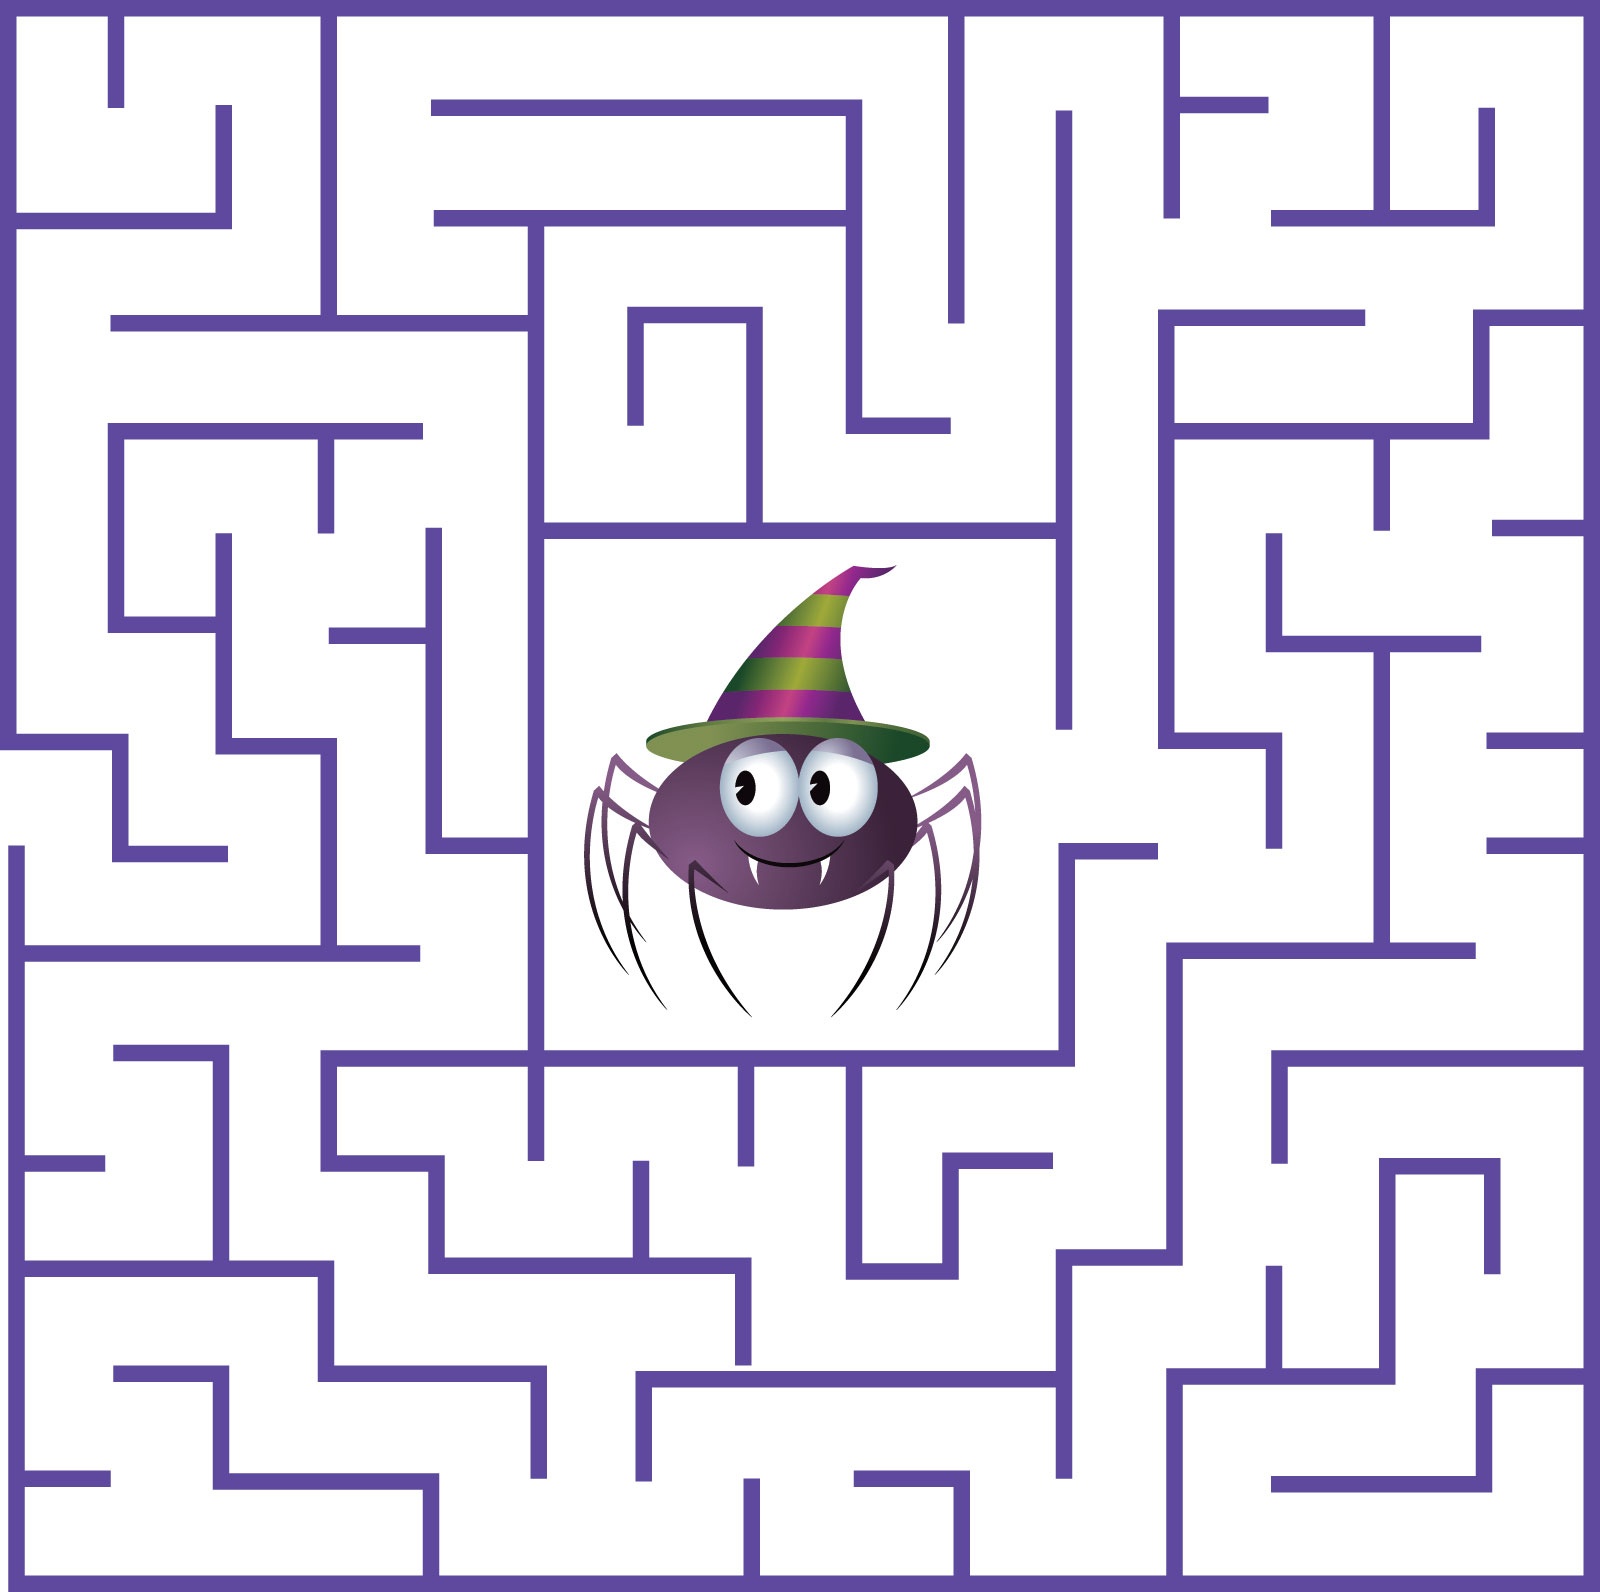 28 Free Printable Mazes For Kids And Adults | Kittybabylove - Free Printable Mazes For Kids